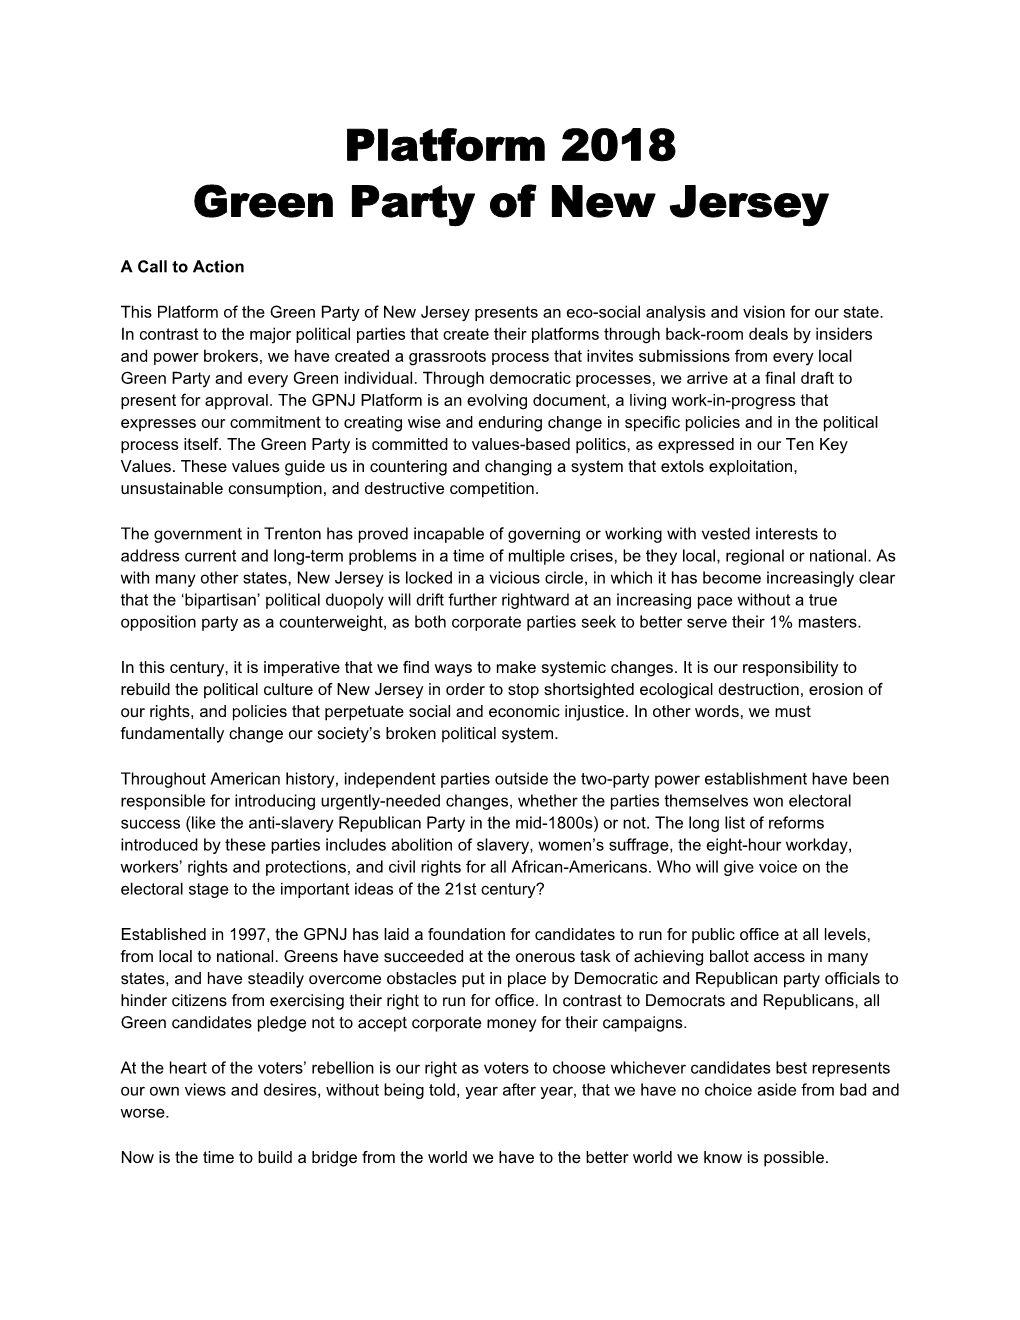 Platform 2018 Green Party of New Jersey